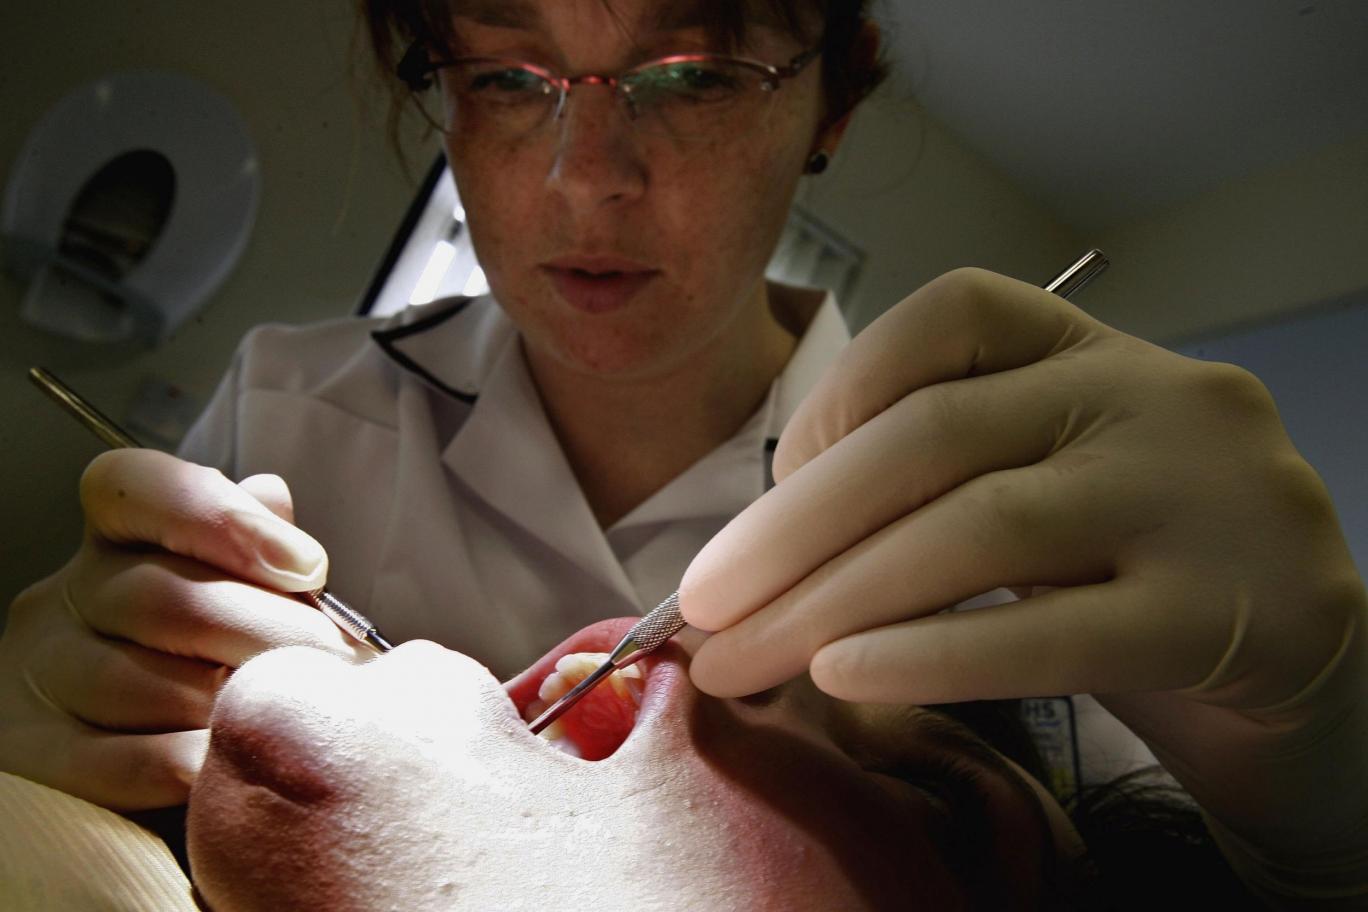 Brittish Researches Have Discovered A New Technique To Regrow Teeth Using An Alzheimer's Drug